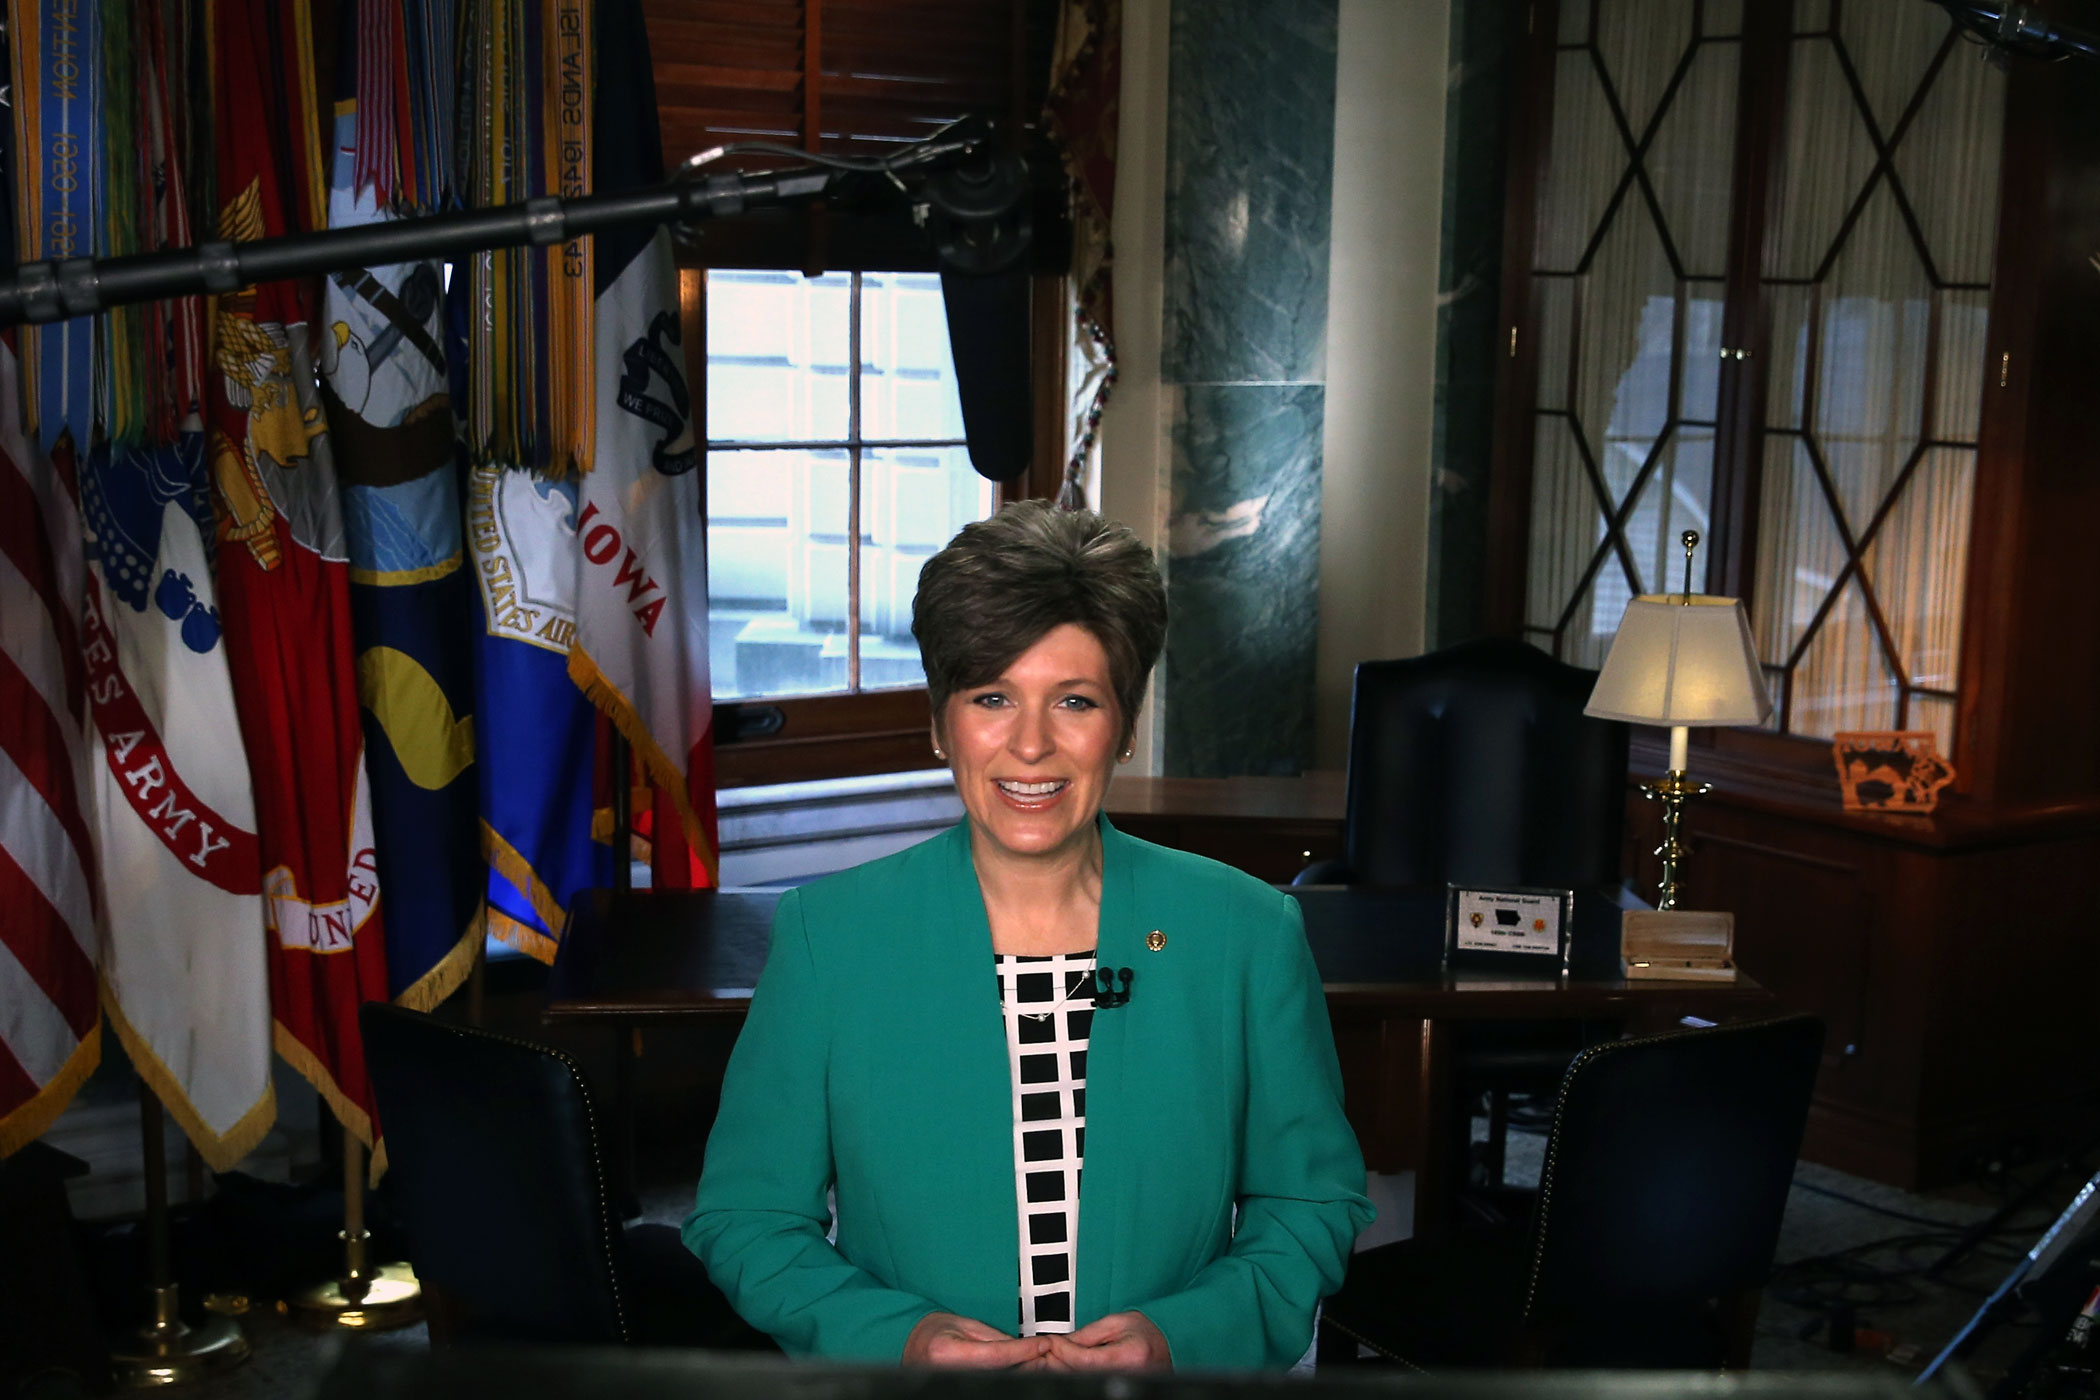 U.S. Sen. Joni Ernst prepares to deliver the Republican response to President Barack Obama's State of the Union address, on Capitol Hill on Jan. 20, 2015 in Washington.